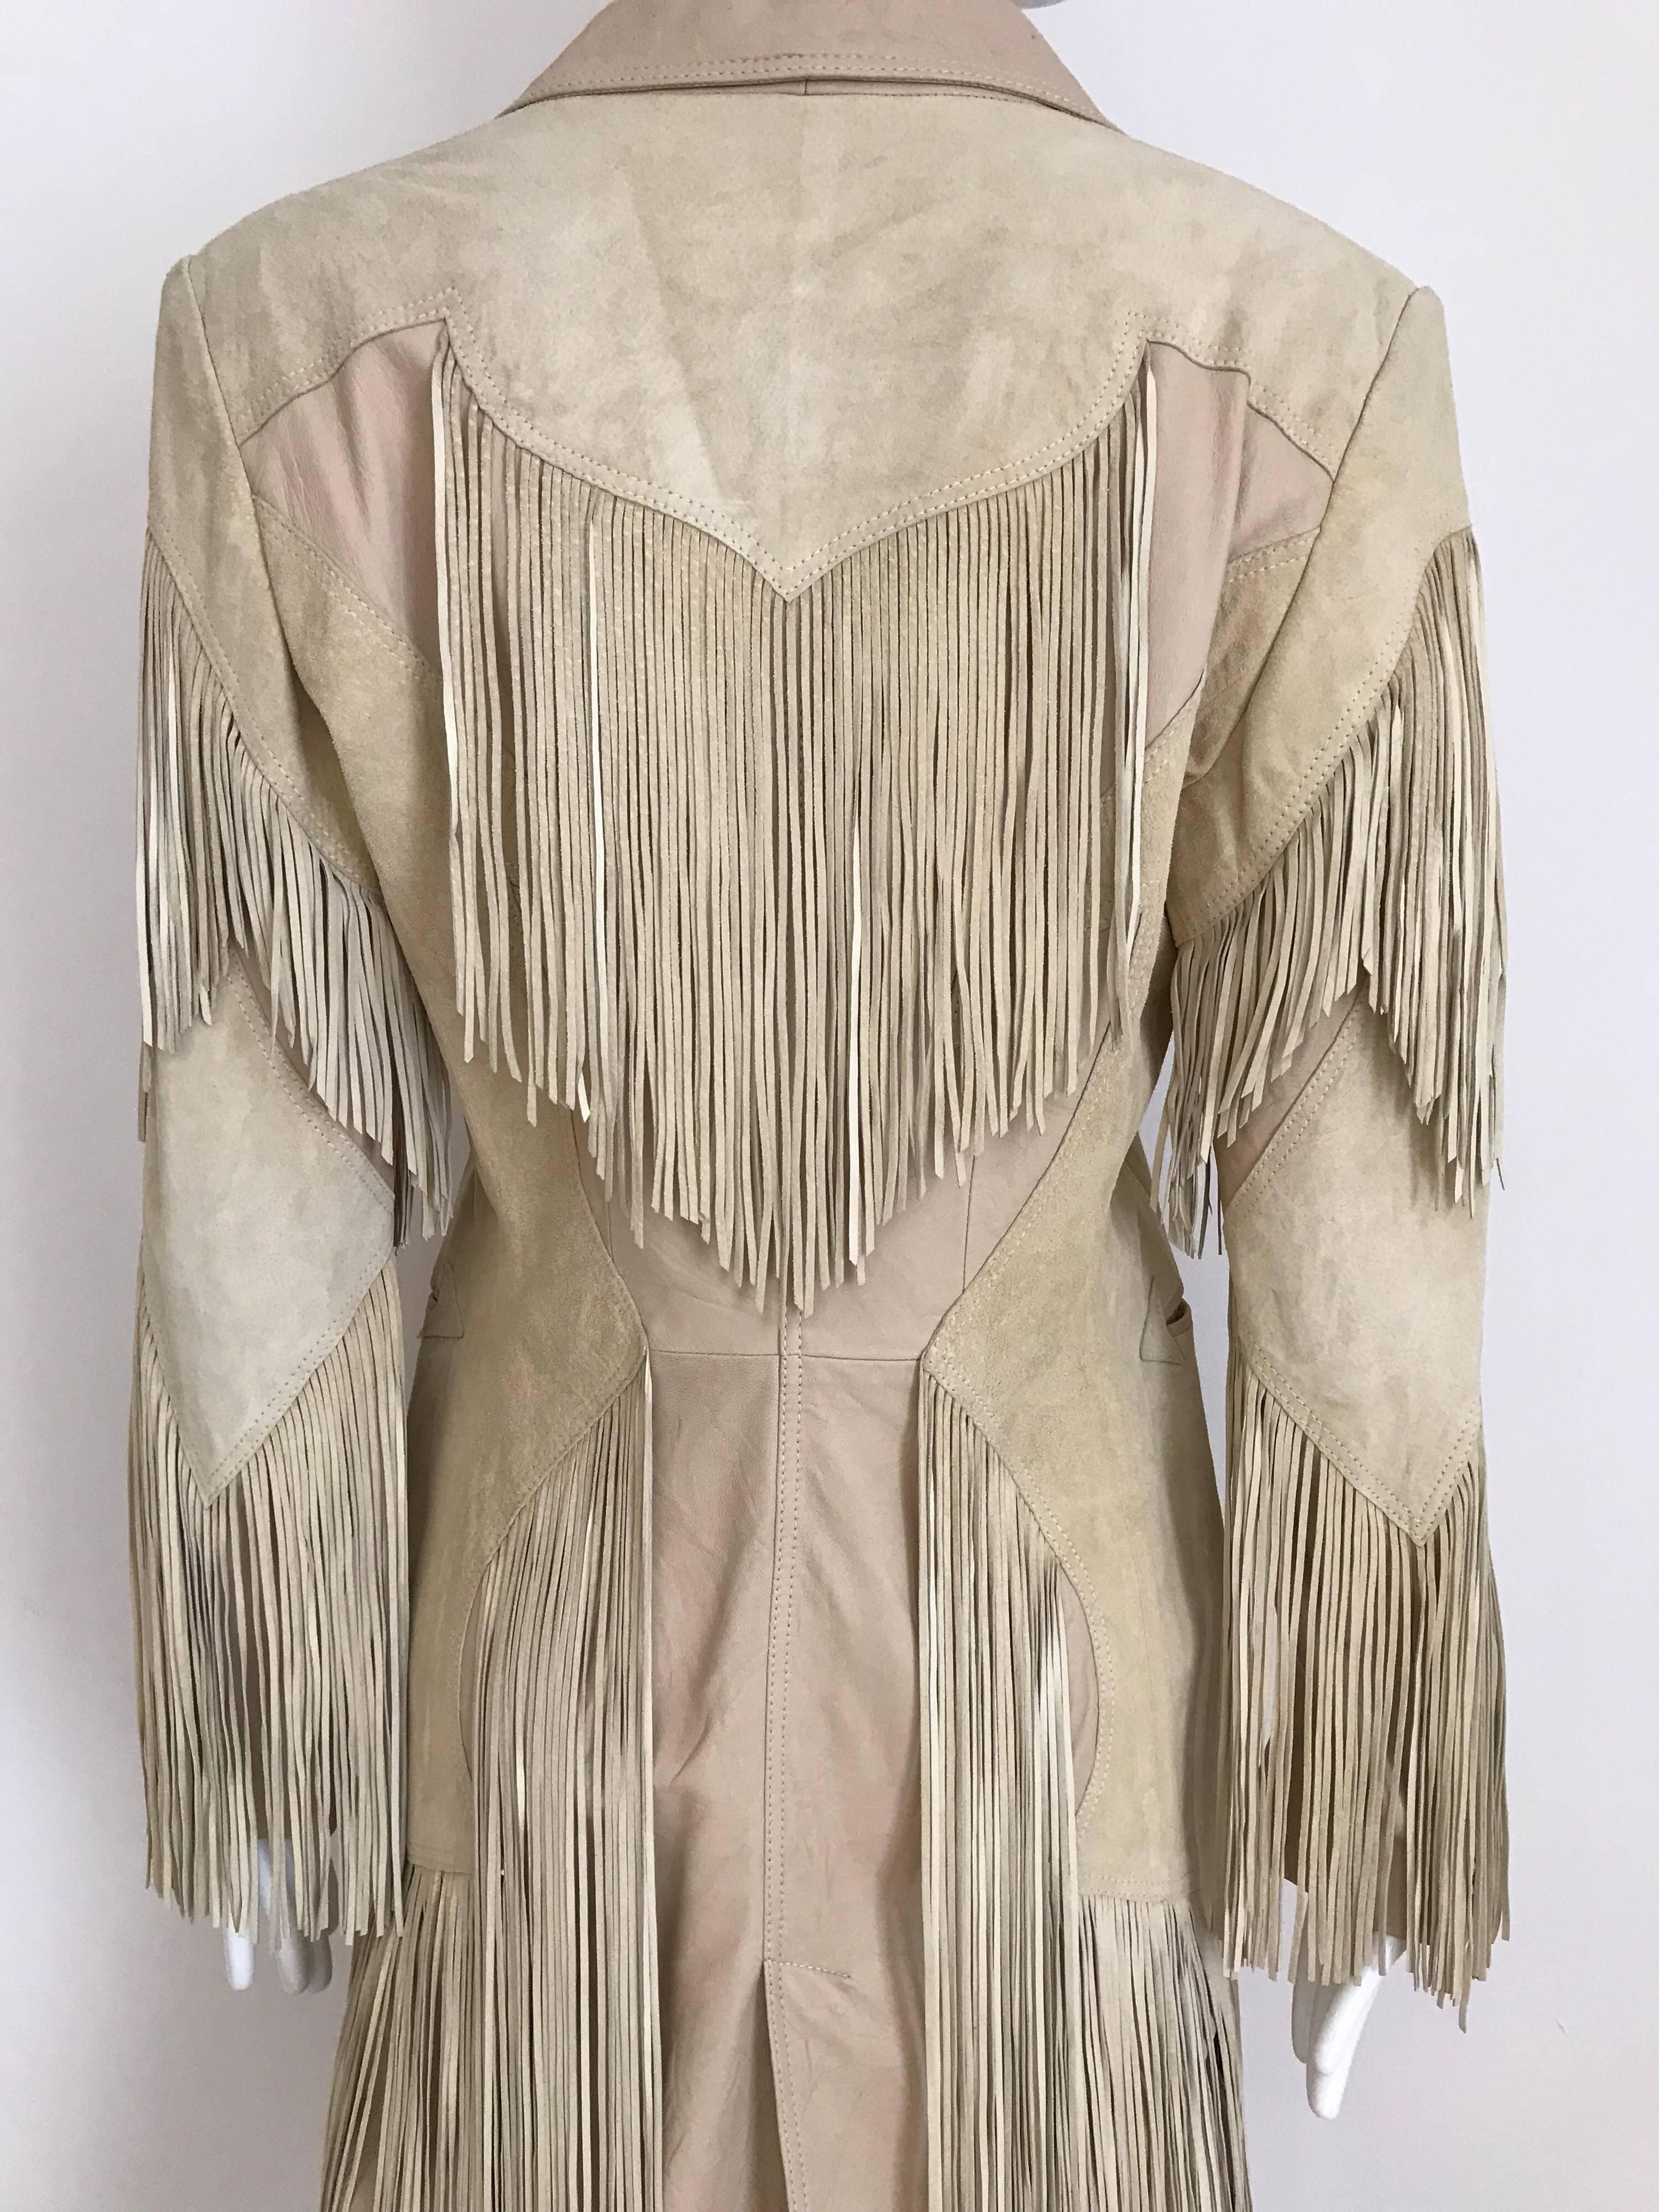 Vintage Versace creme leather and suede coat with fringe and pockets.
Fit size US 6